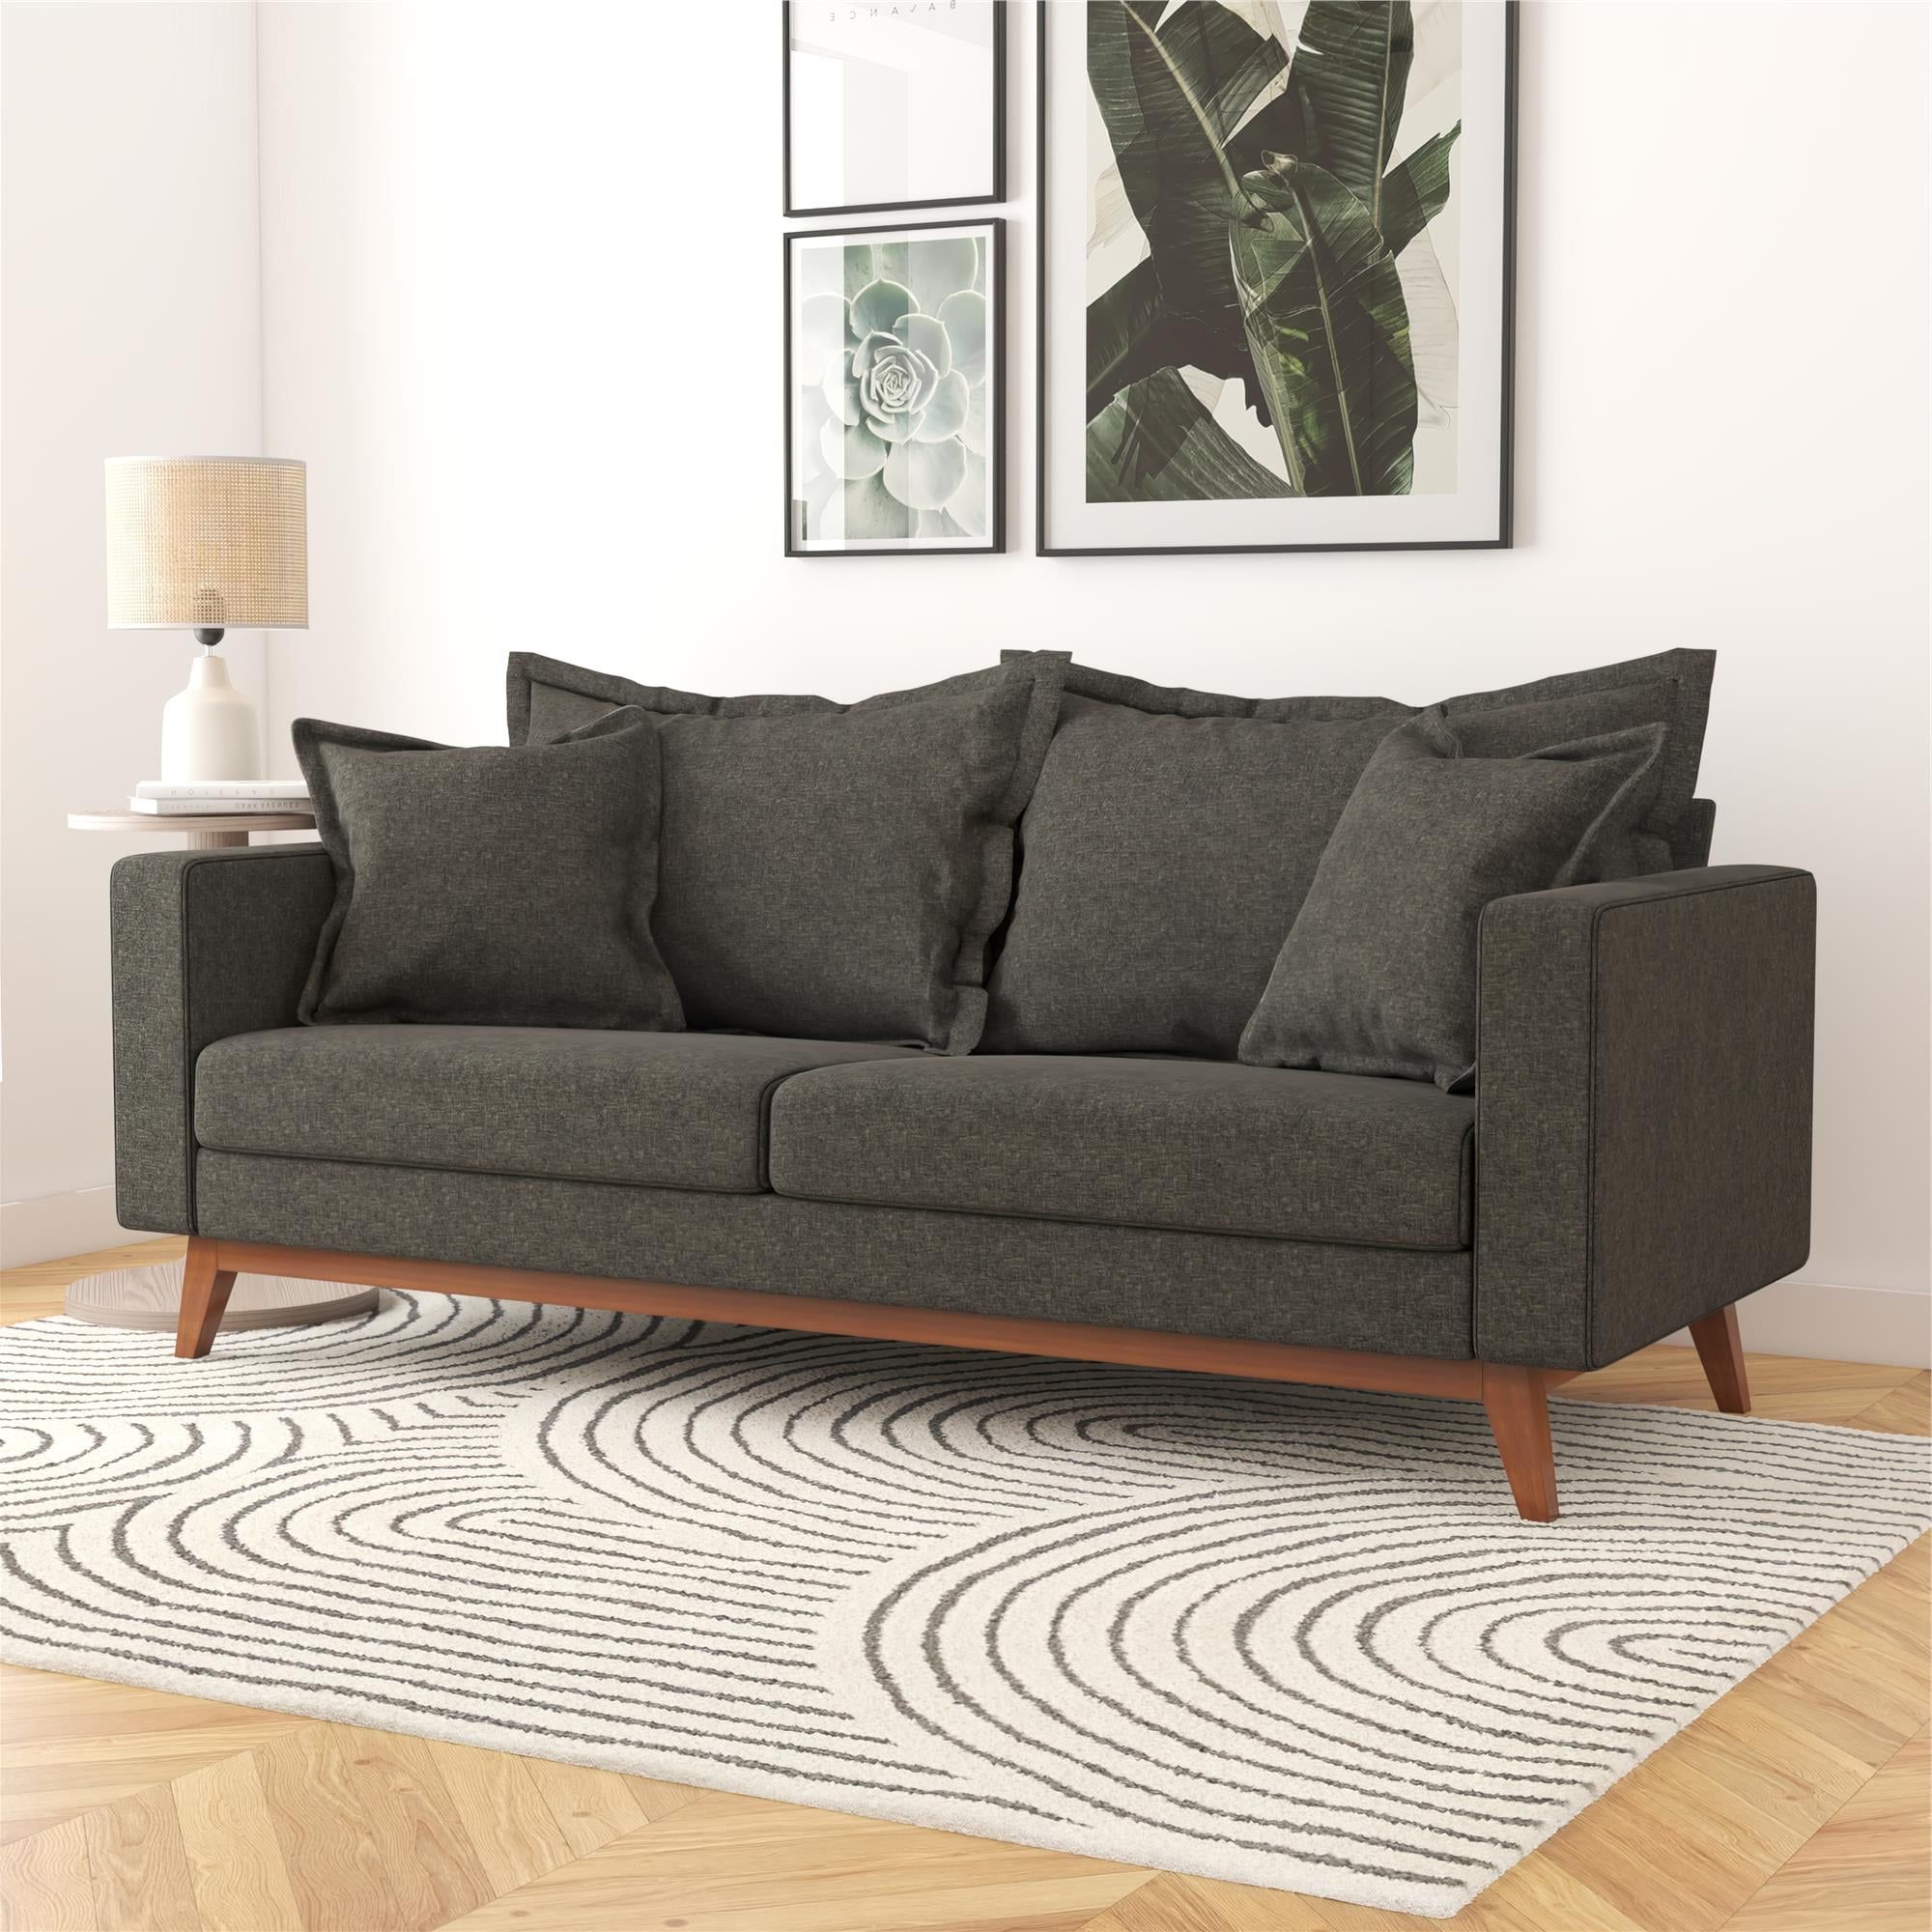 Sofas With Pillowback Wood Bases Inside Latest Dhp Miriam Pillowback Wood Base Sofa, Gray Linen – Walmart (View 5 of 15)